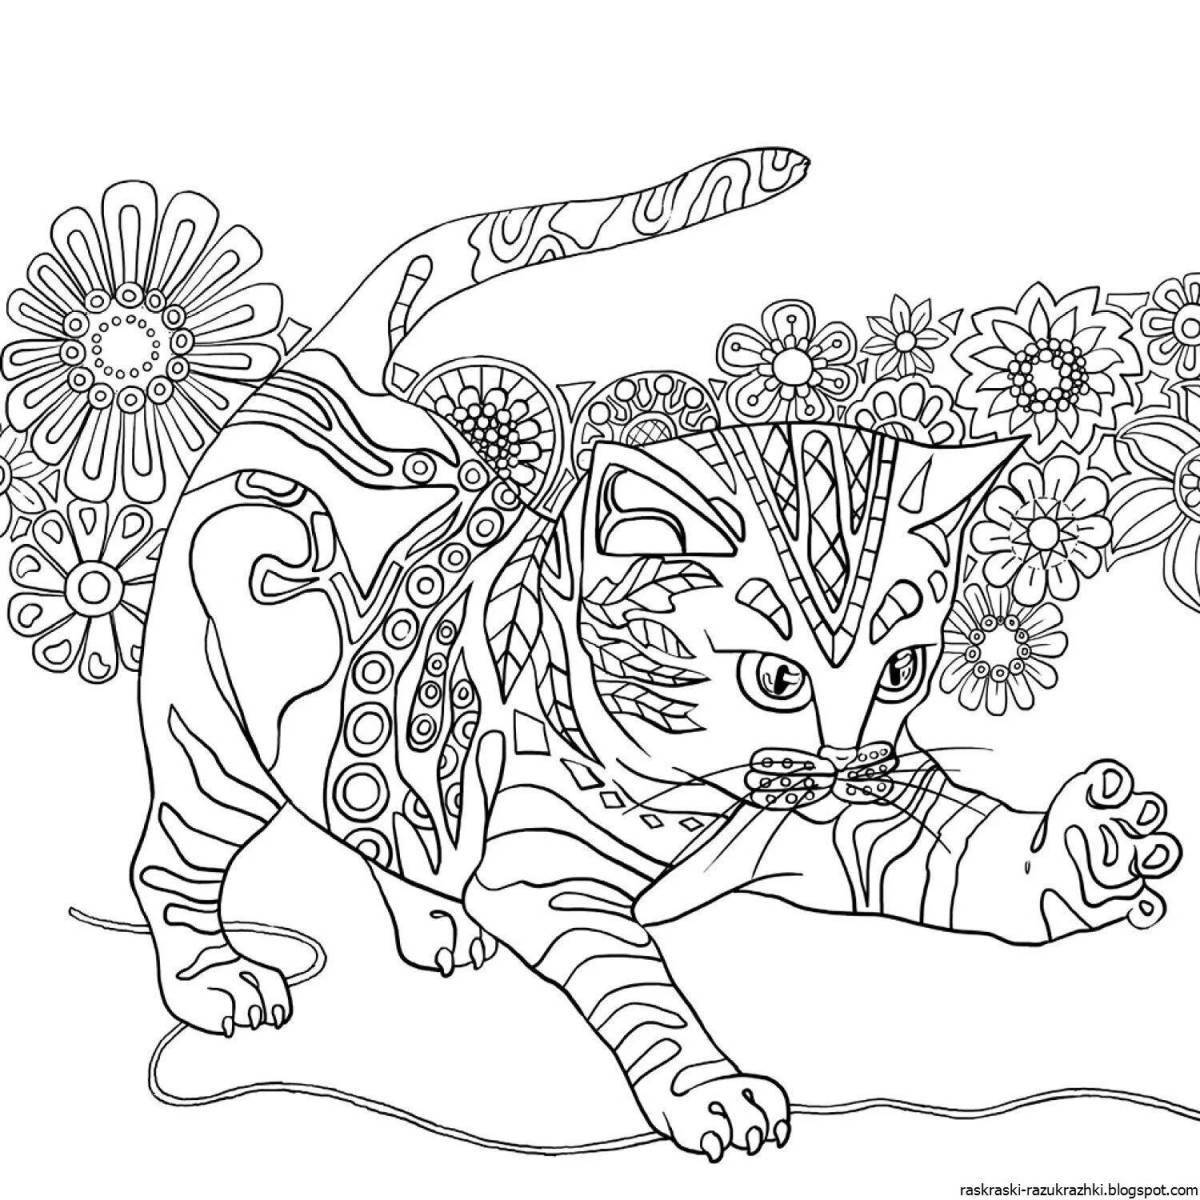 Fun anti-stress coloring book for 10 year olds